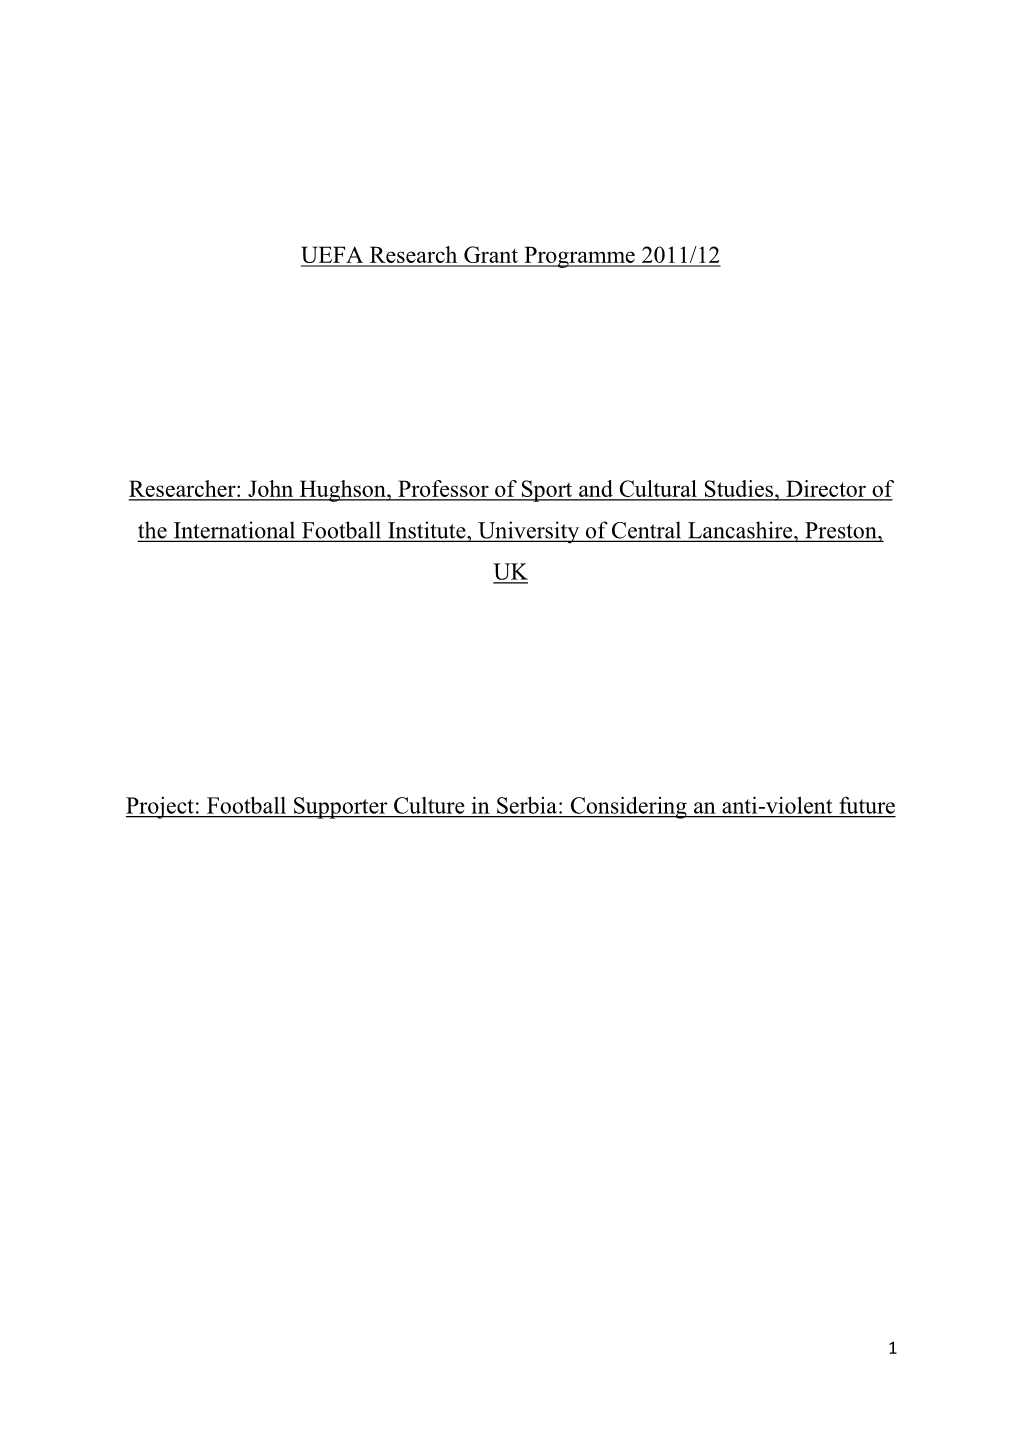 UEFA Research Grant Programme 2011/12